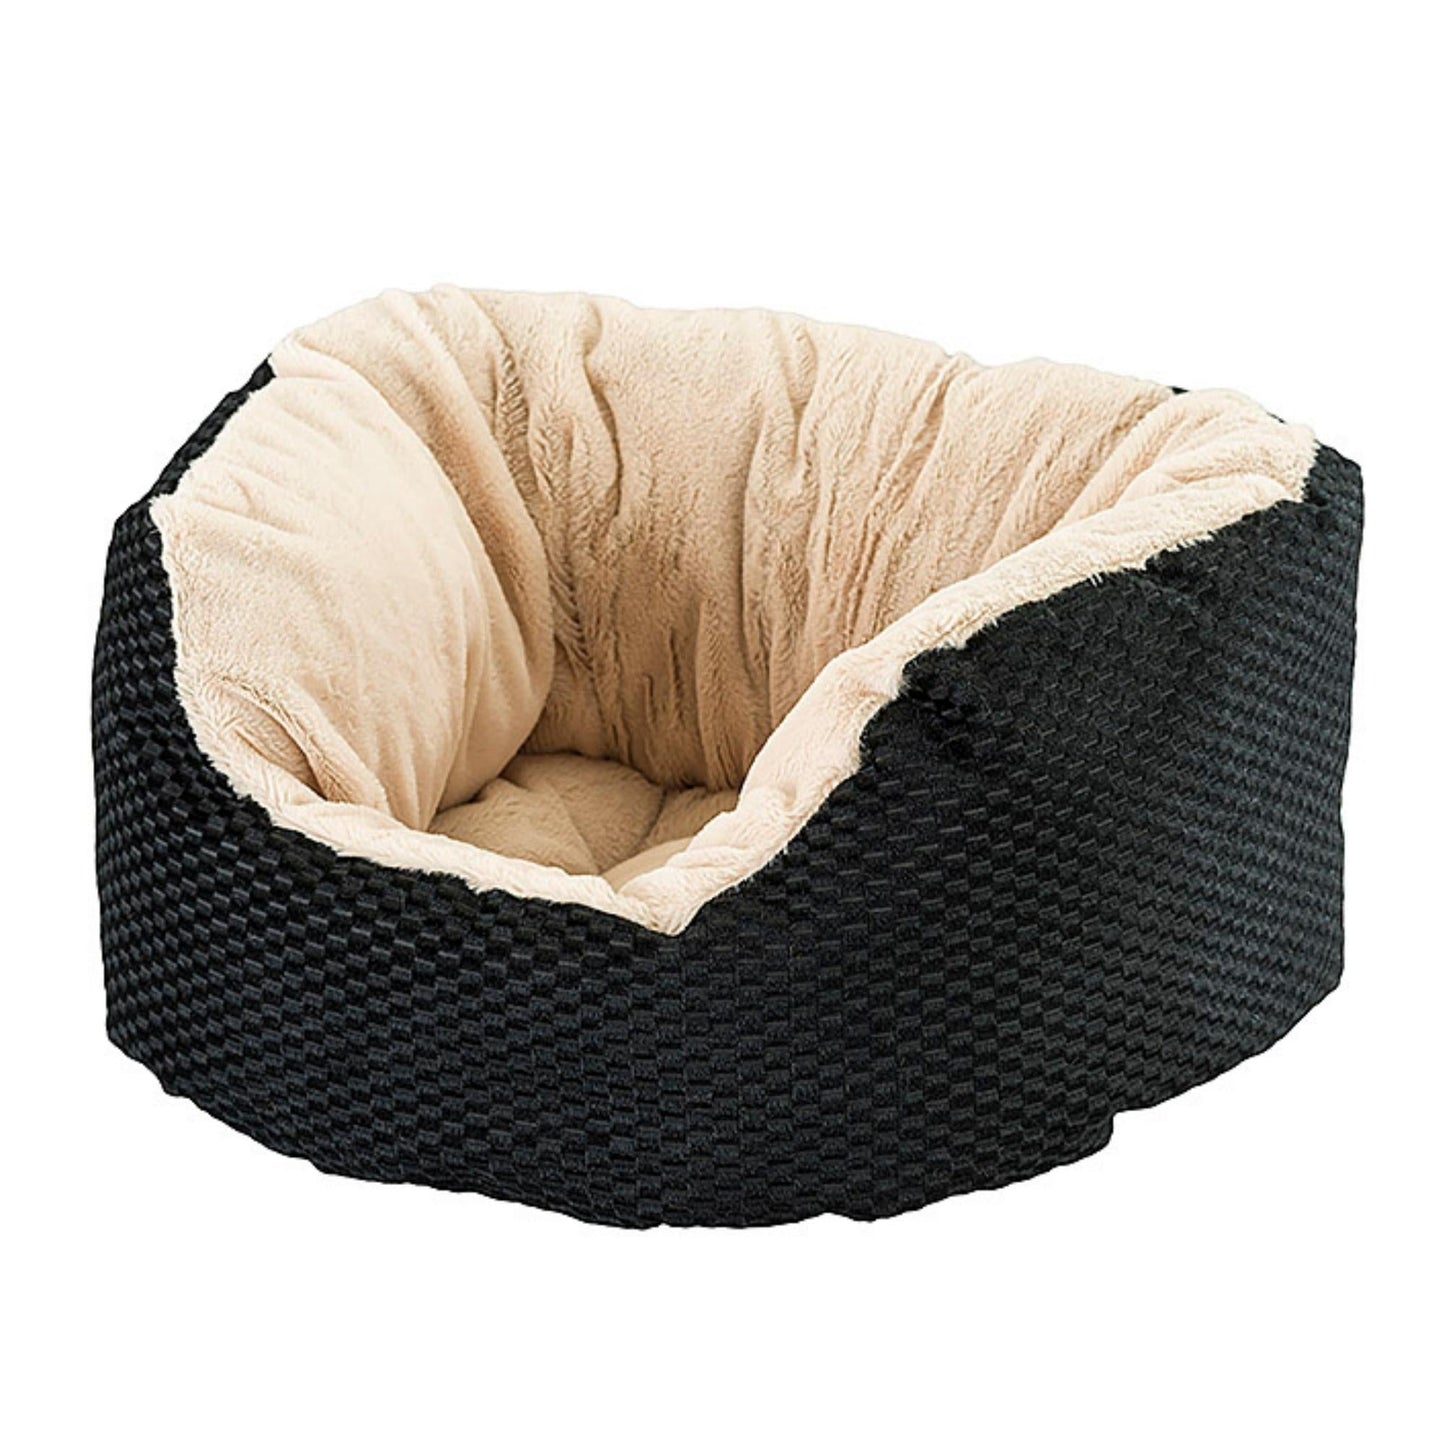 Ethical Pet Sleep Zone Checkerboard Napper 18" Blk